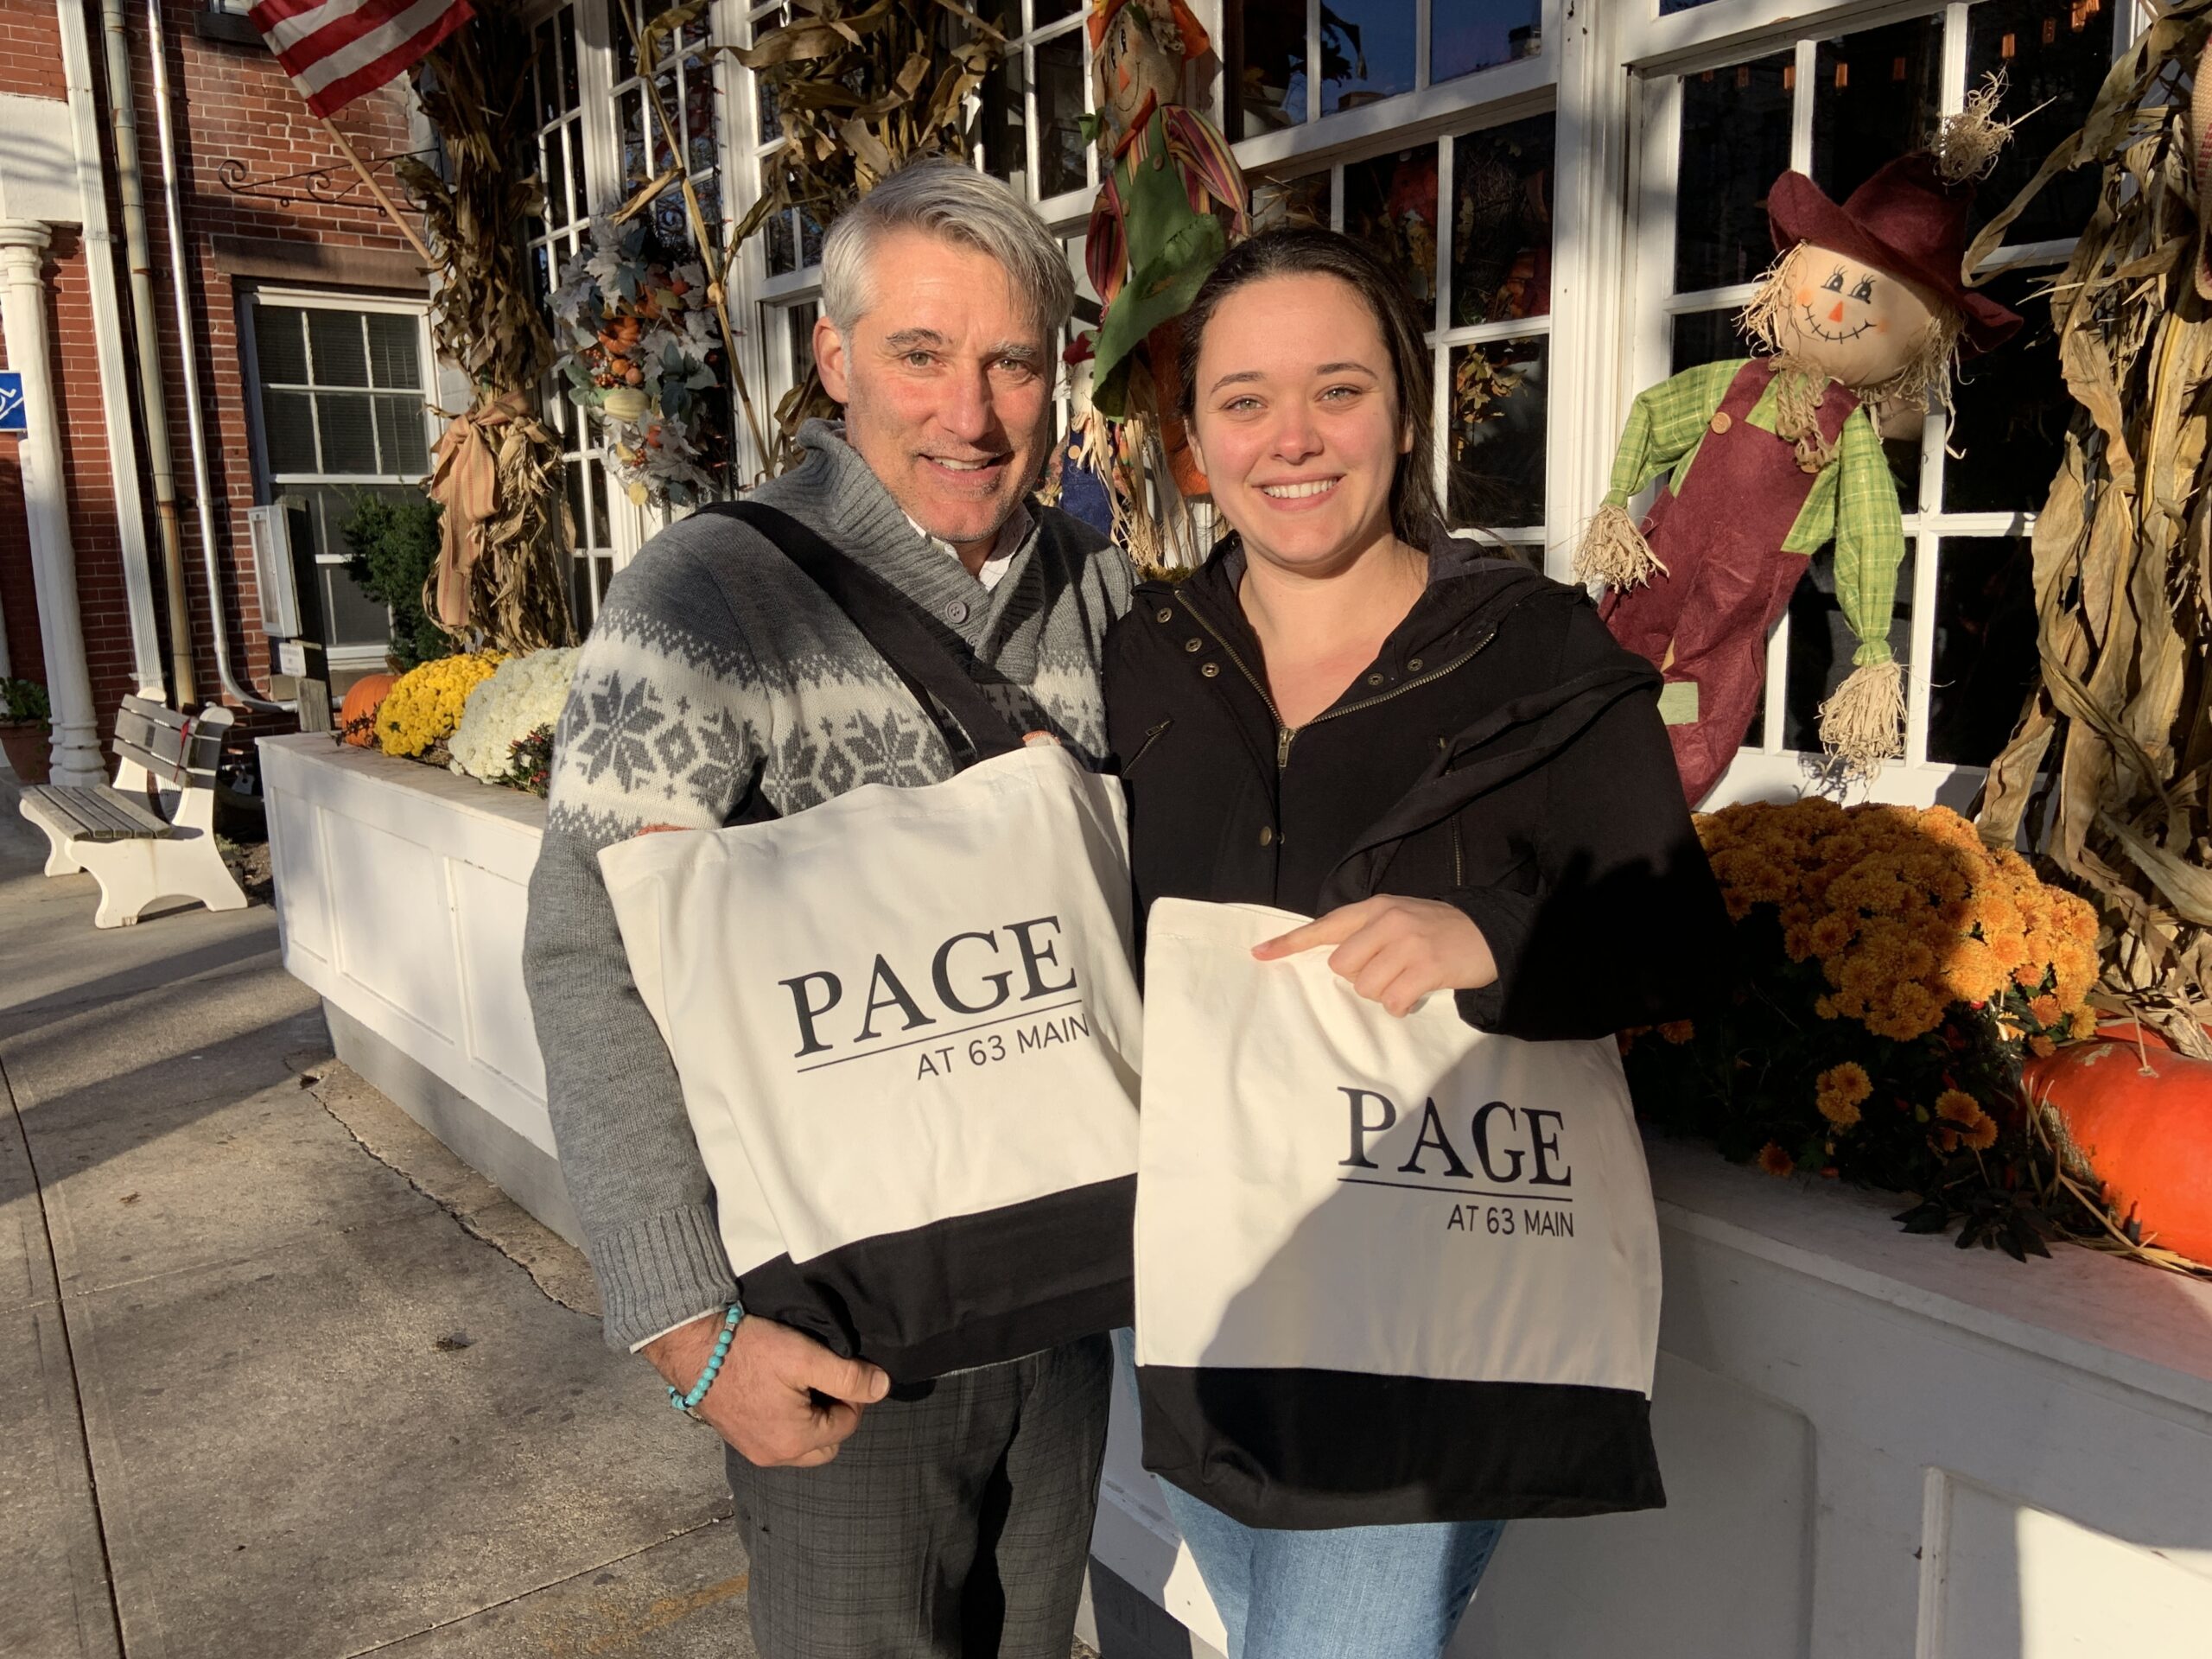 Eric Peele, the director of operations at Page at 63 Main, and Rae McMahon, the restaurant's director of marketing, with canvas tote bags that are being sold as part of a holiday fundraiser to benefit the Sag Harbor Food Pantry. STEPHEN J. KOTZ